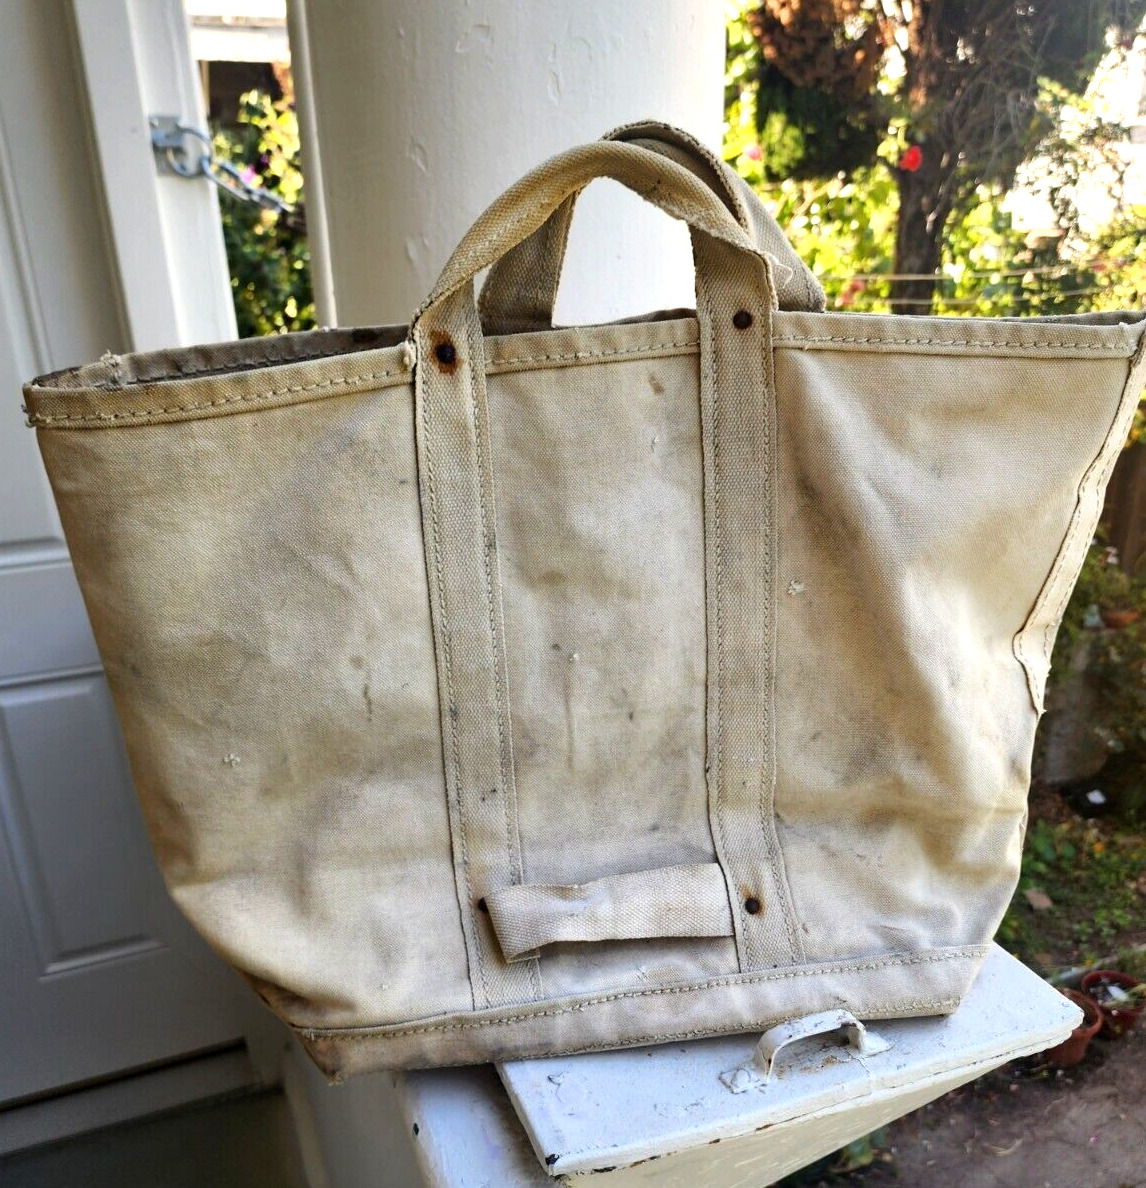 Bell System Telephone Lineman Canvas Tote Tool Bag Vintage Distressed Rivets 40s